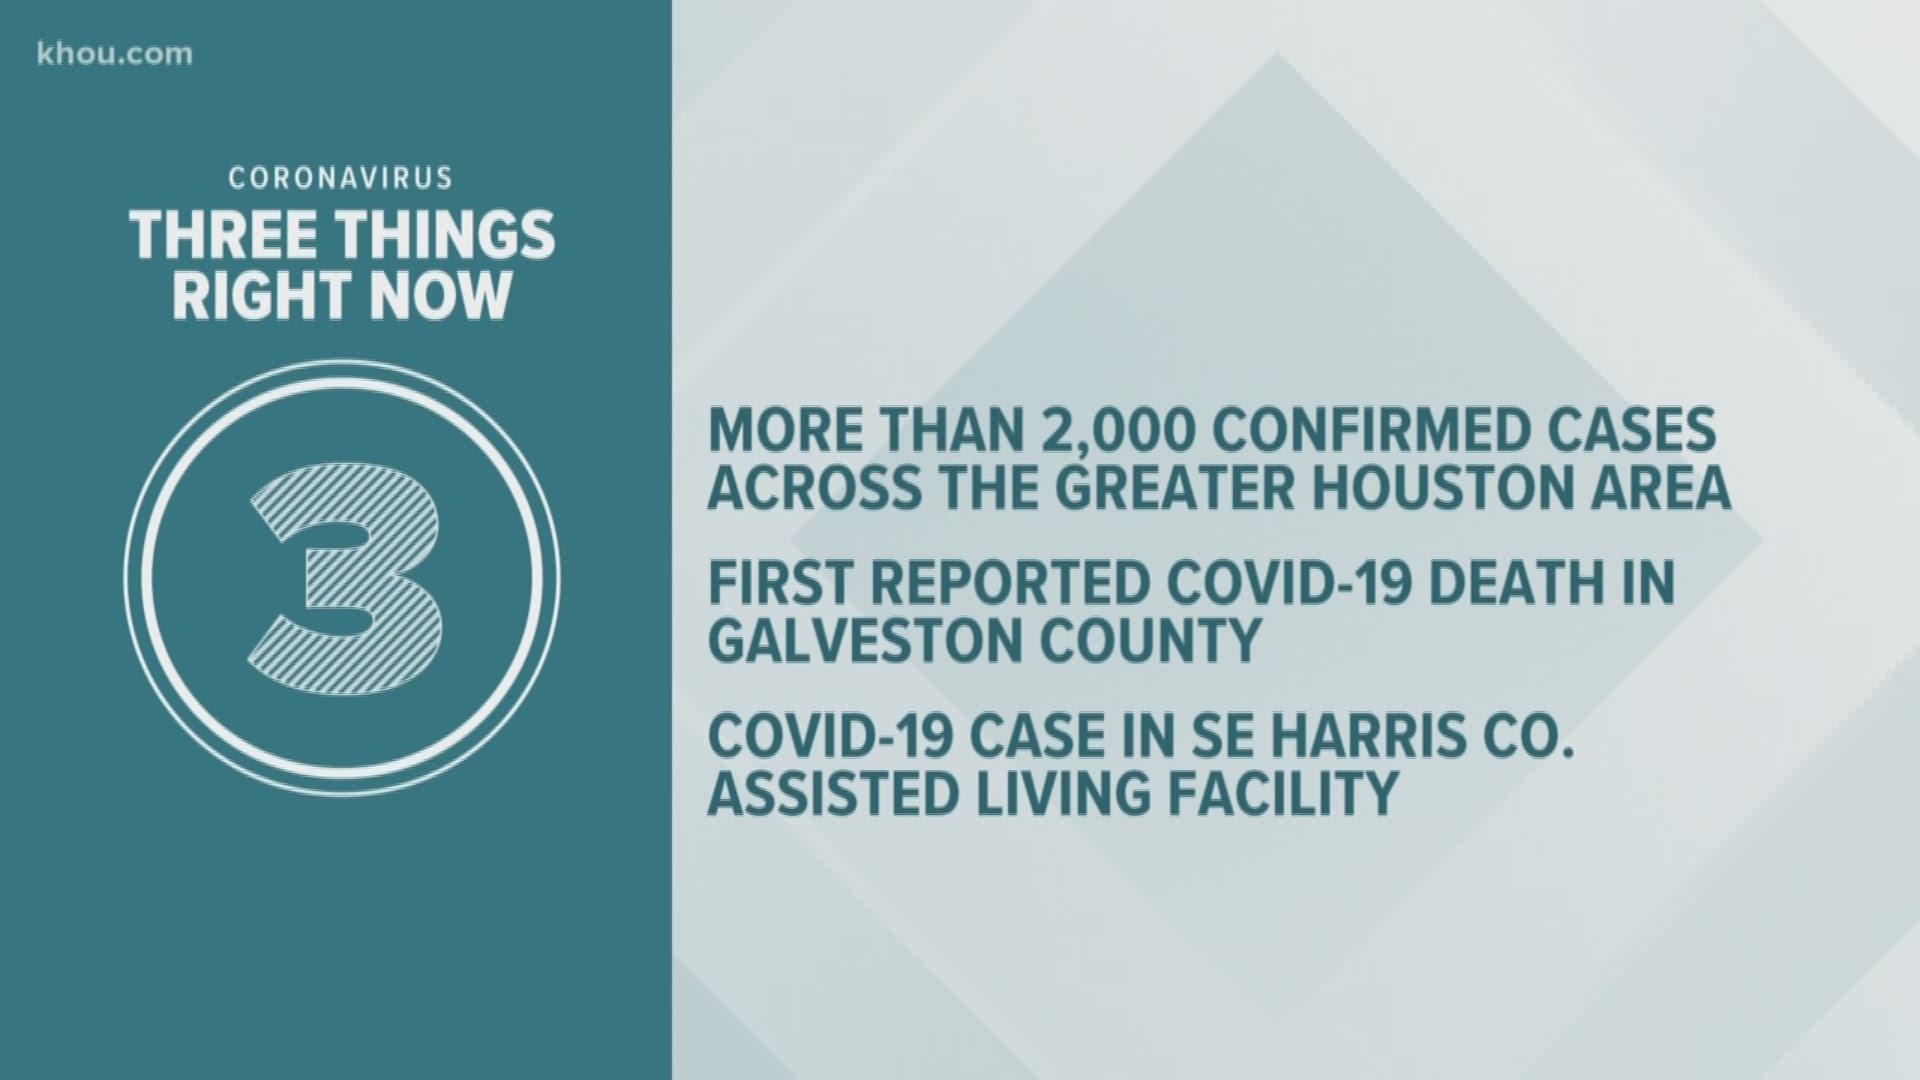 More than 2,000 cases in the greater Houston area, the first reported COVID-19 death in Galveston County, and the virus strikes an assisted-living facility.